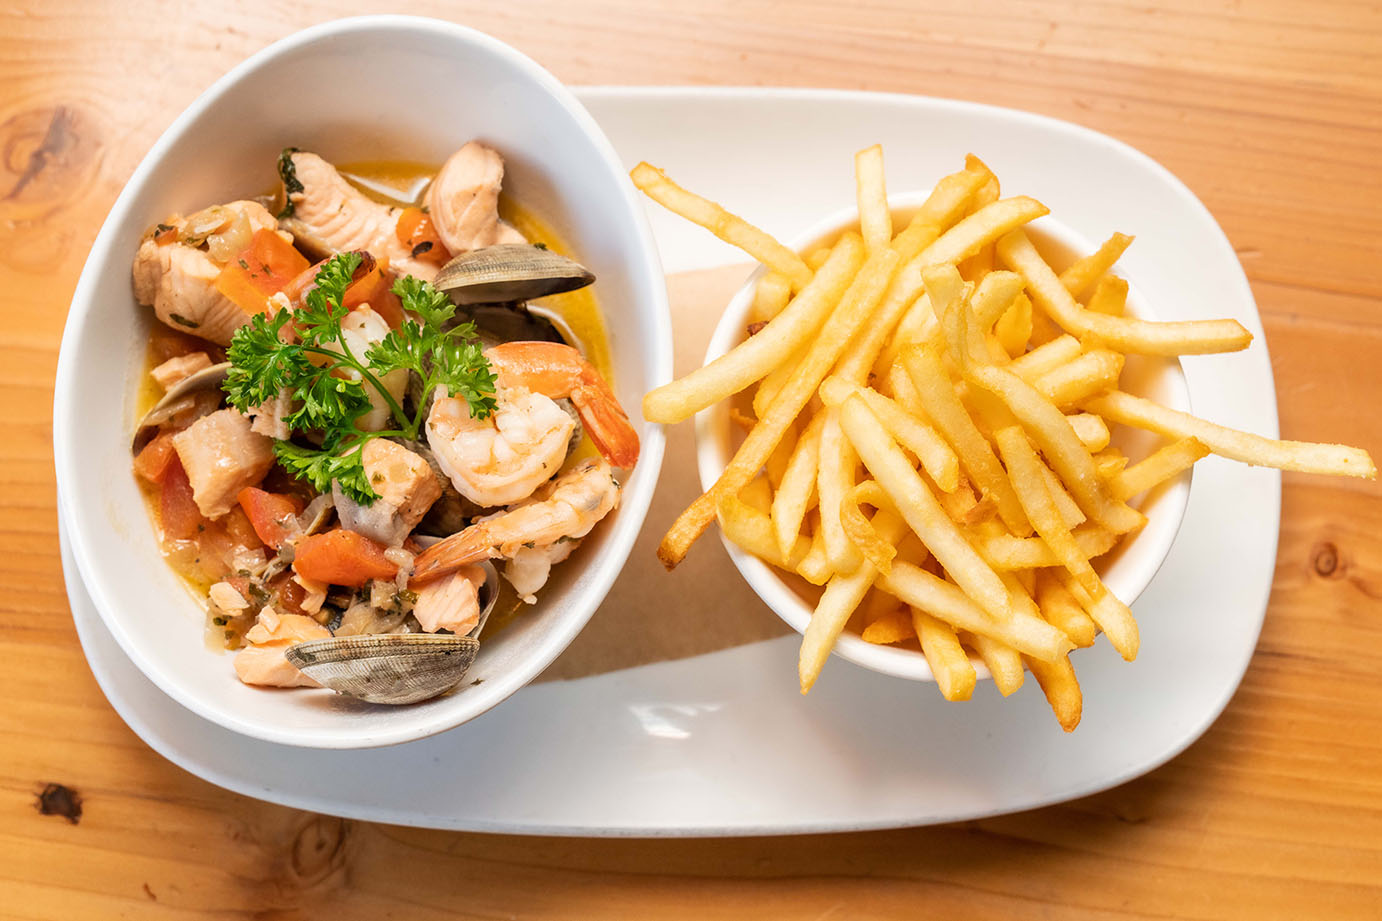 Seafood dish with a side of fries.